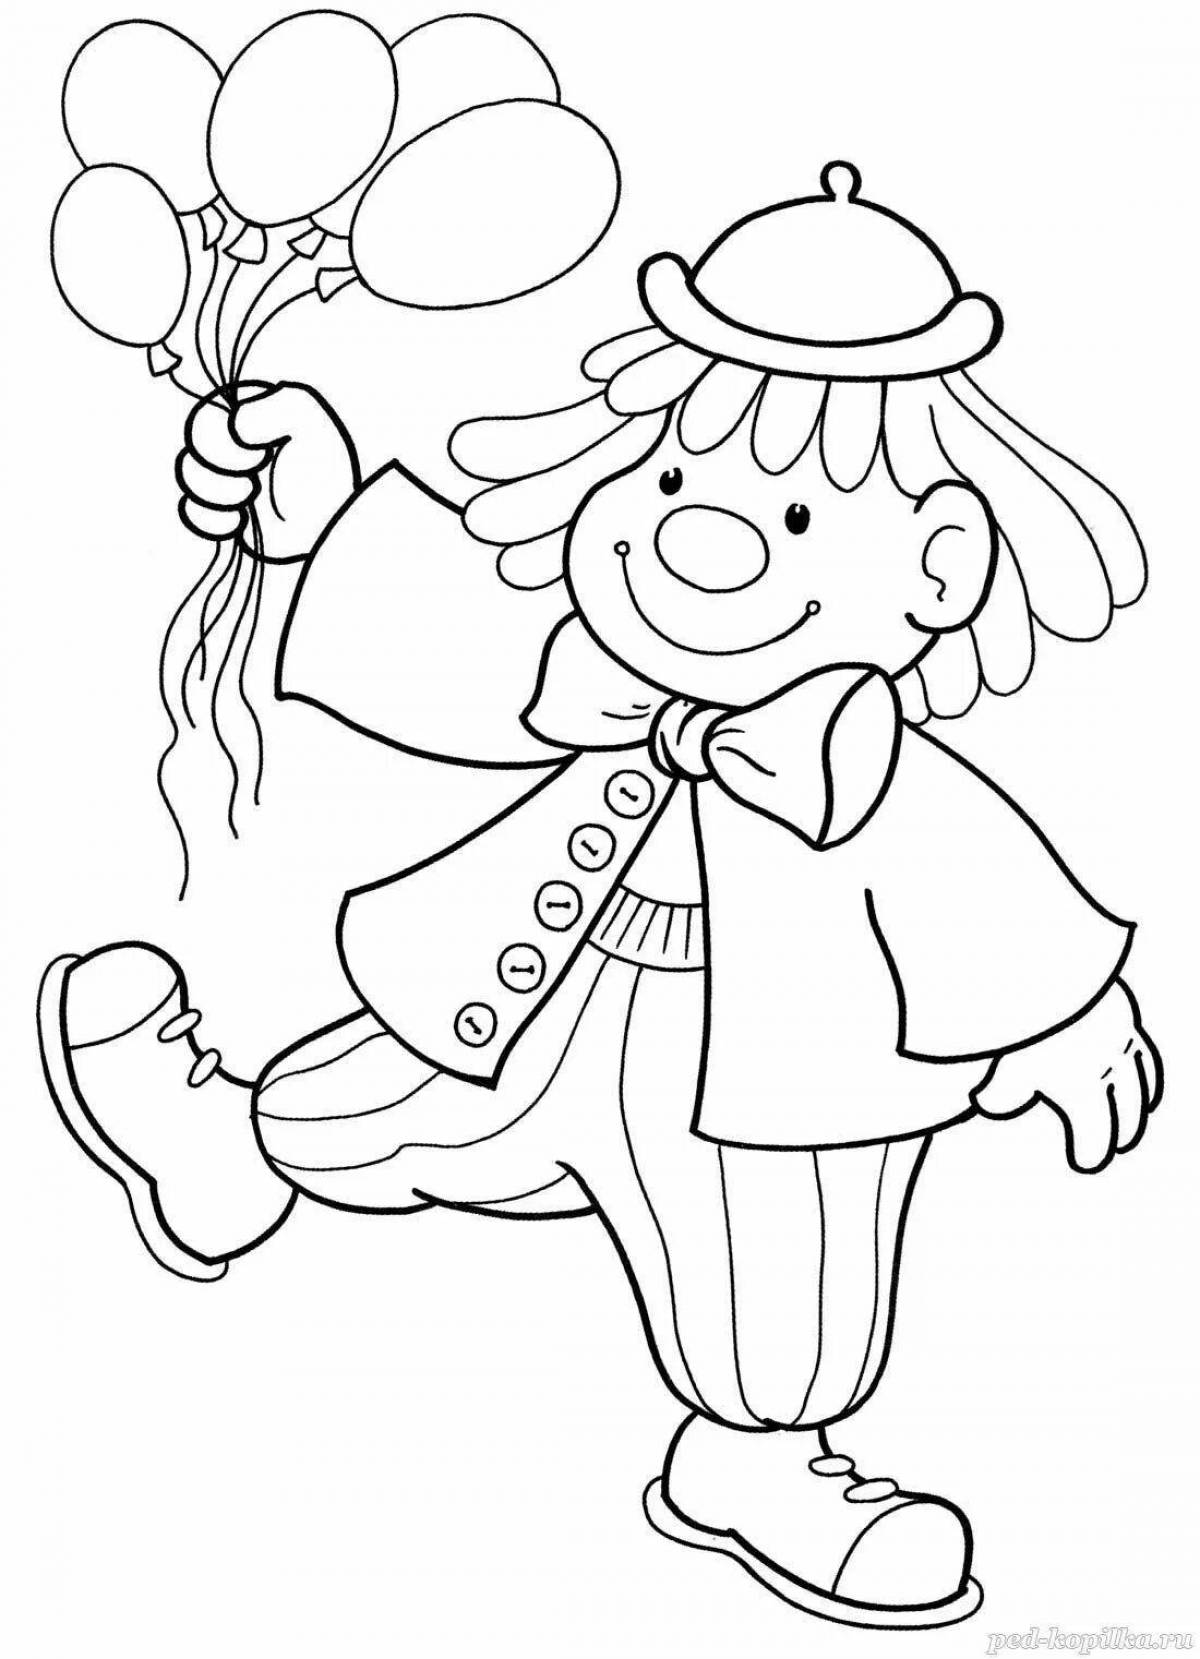 Awesome coloring book visiting a clown